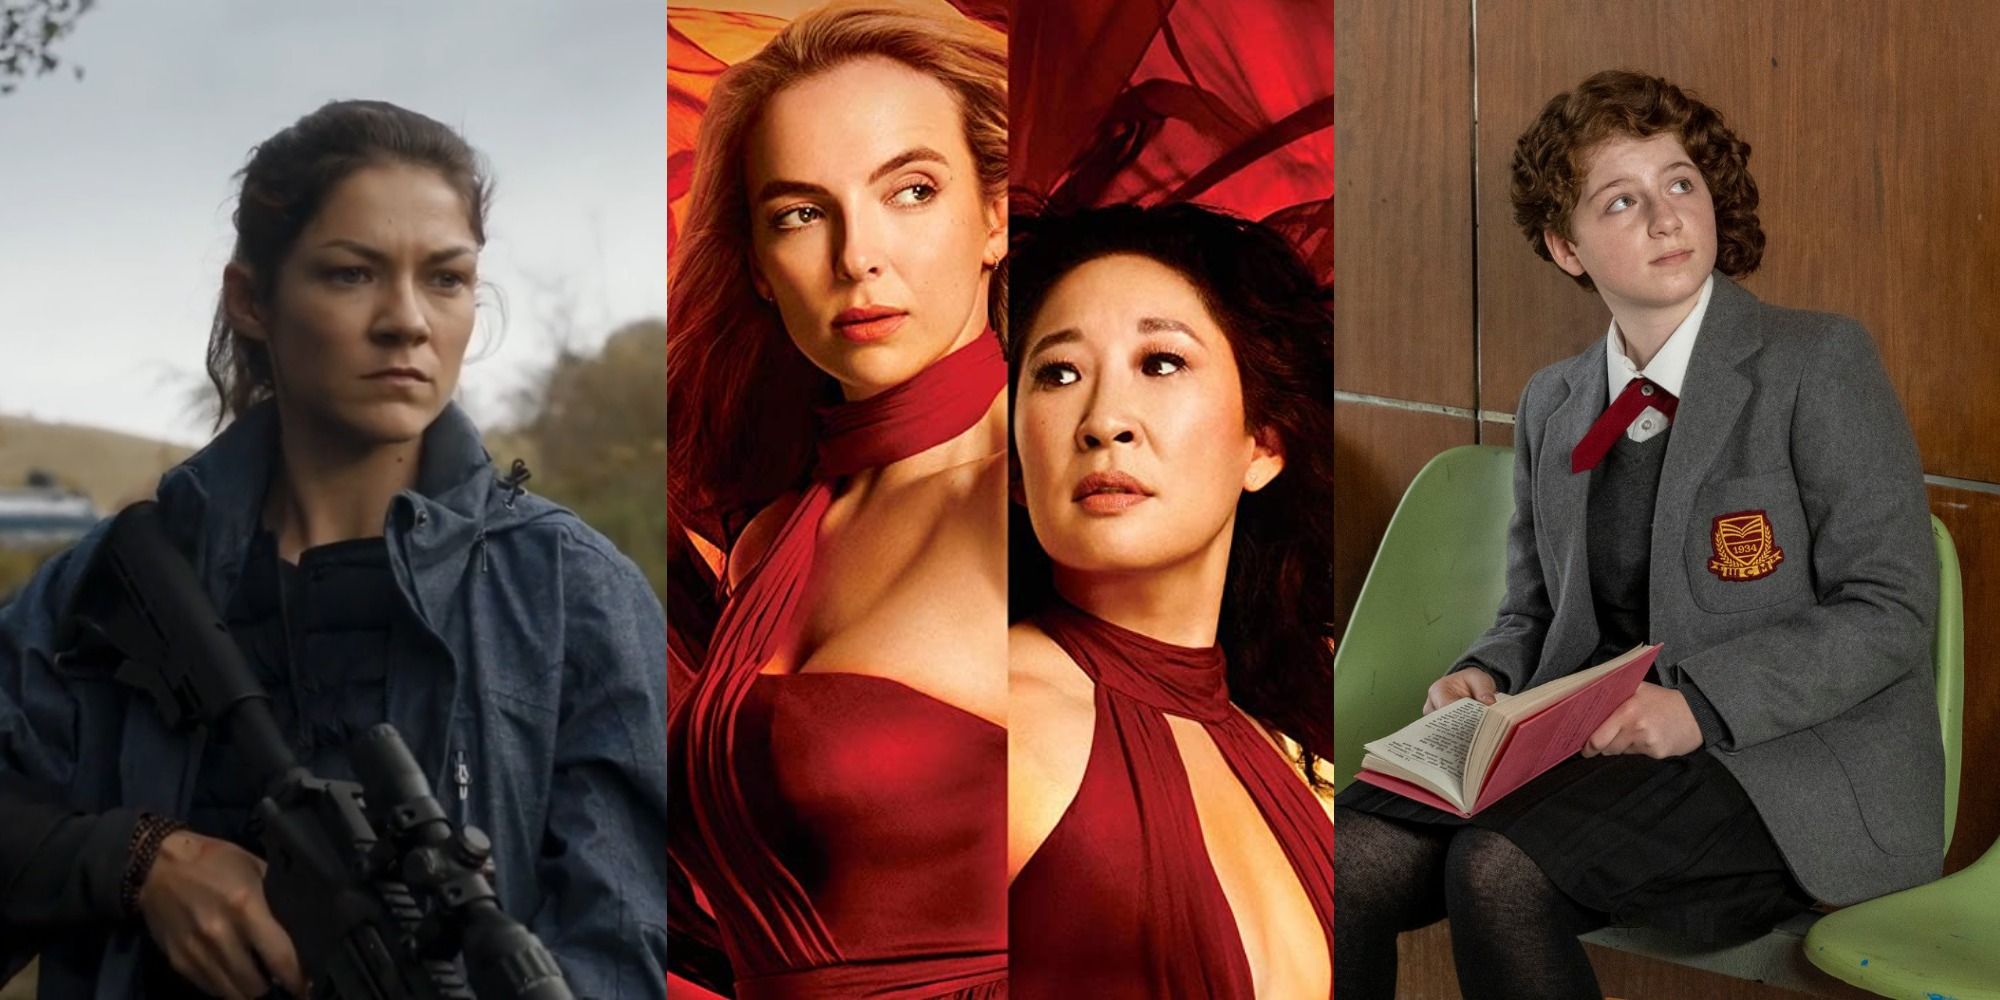 Split image of Nadia holding a gun, Eve and Villanelle on the poster, and Irina in uniform in Killing Eve.